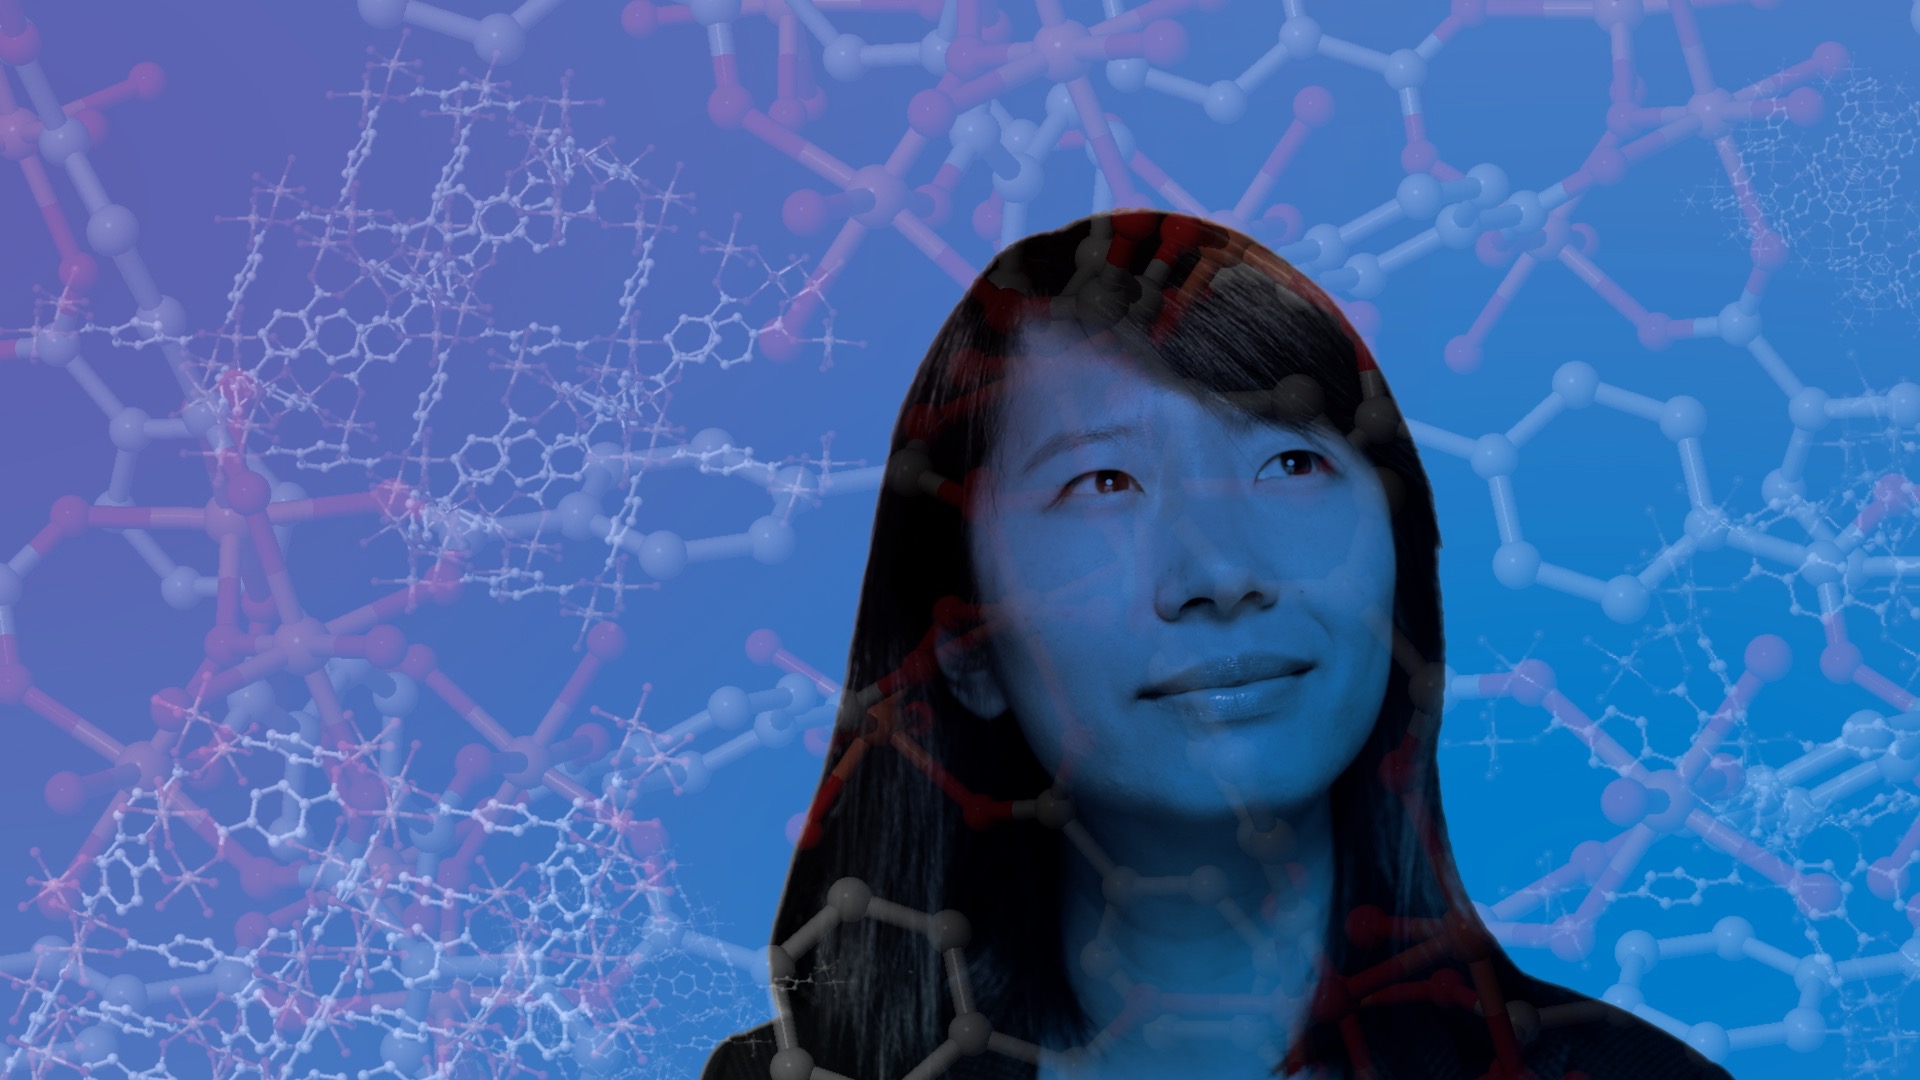 Quest magazine cover showing Professor Fangyuan Tian and the molecule that she is researching.